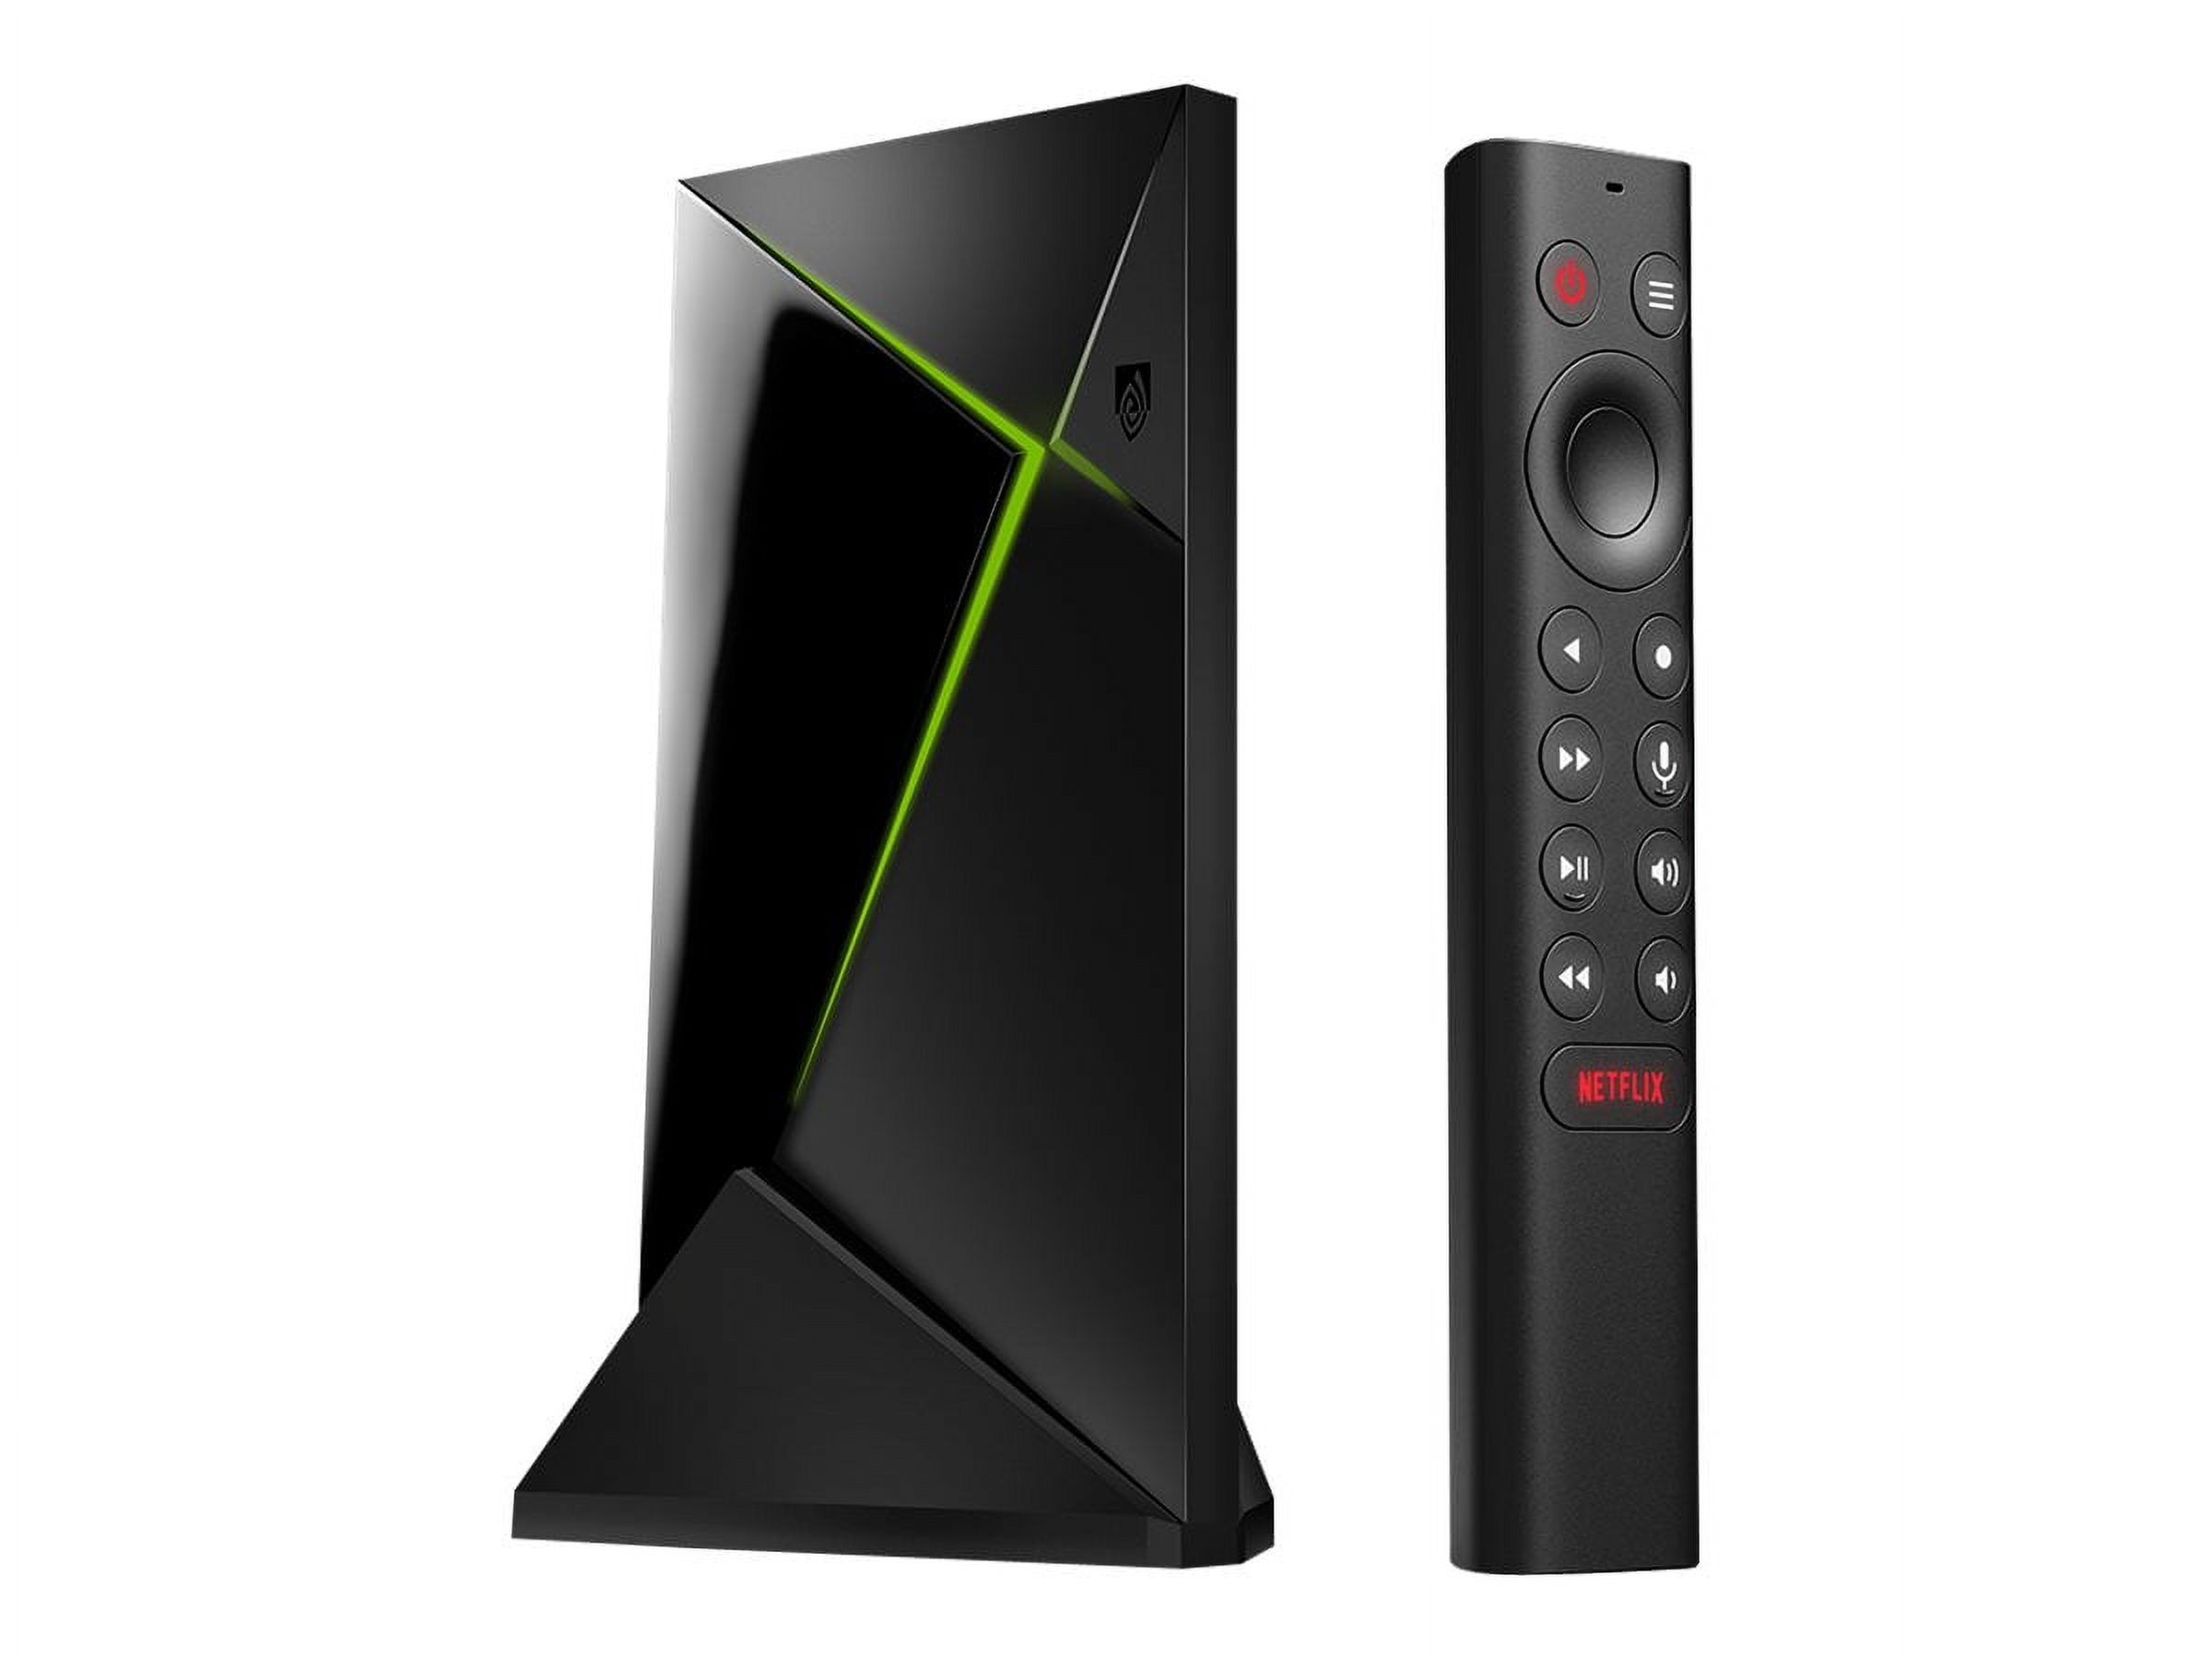 NVIDIA SHIELD Android TV Pro - 4K HDR Streaming Media Player - High Performance, Dolby Vision, 3GB RAM, 2 x USB, Google Assistant Built-In, Works with Alexa (945-12897-2500-101) - image 1 of 2